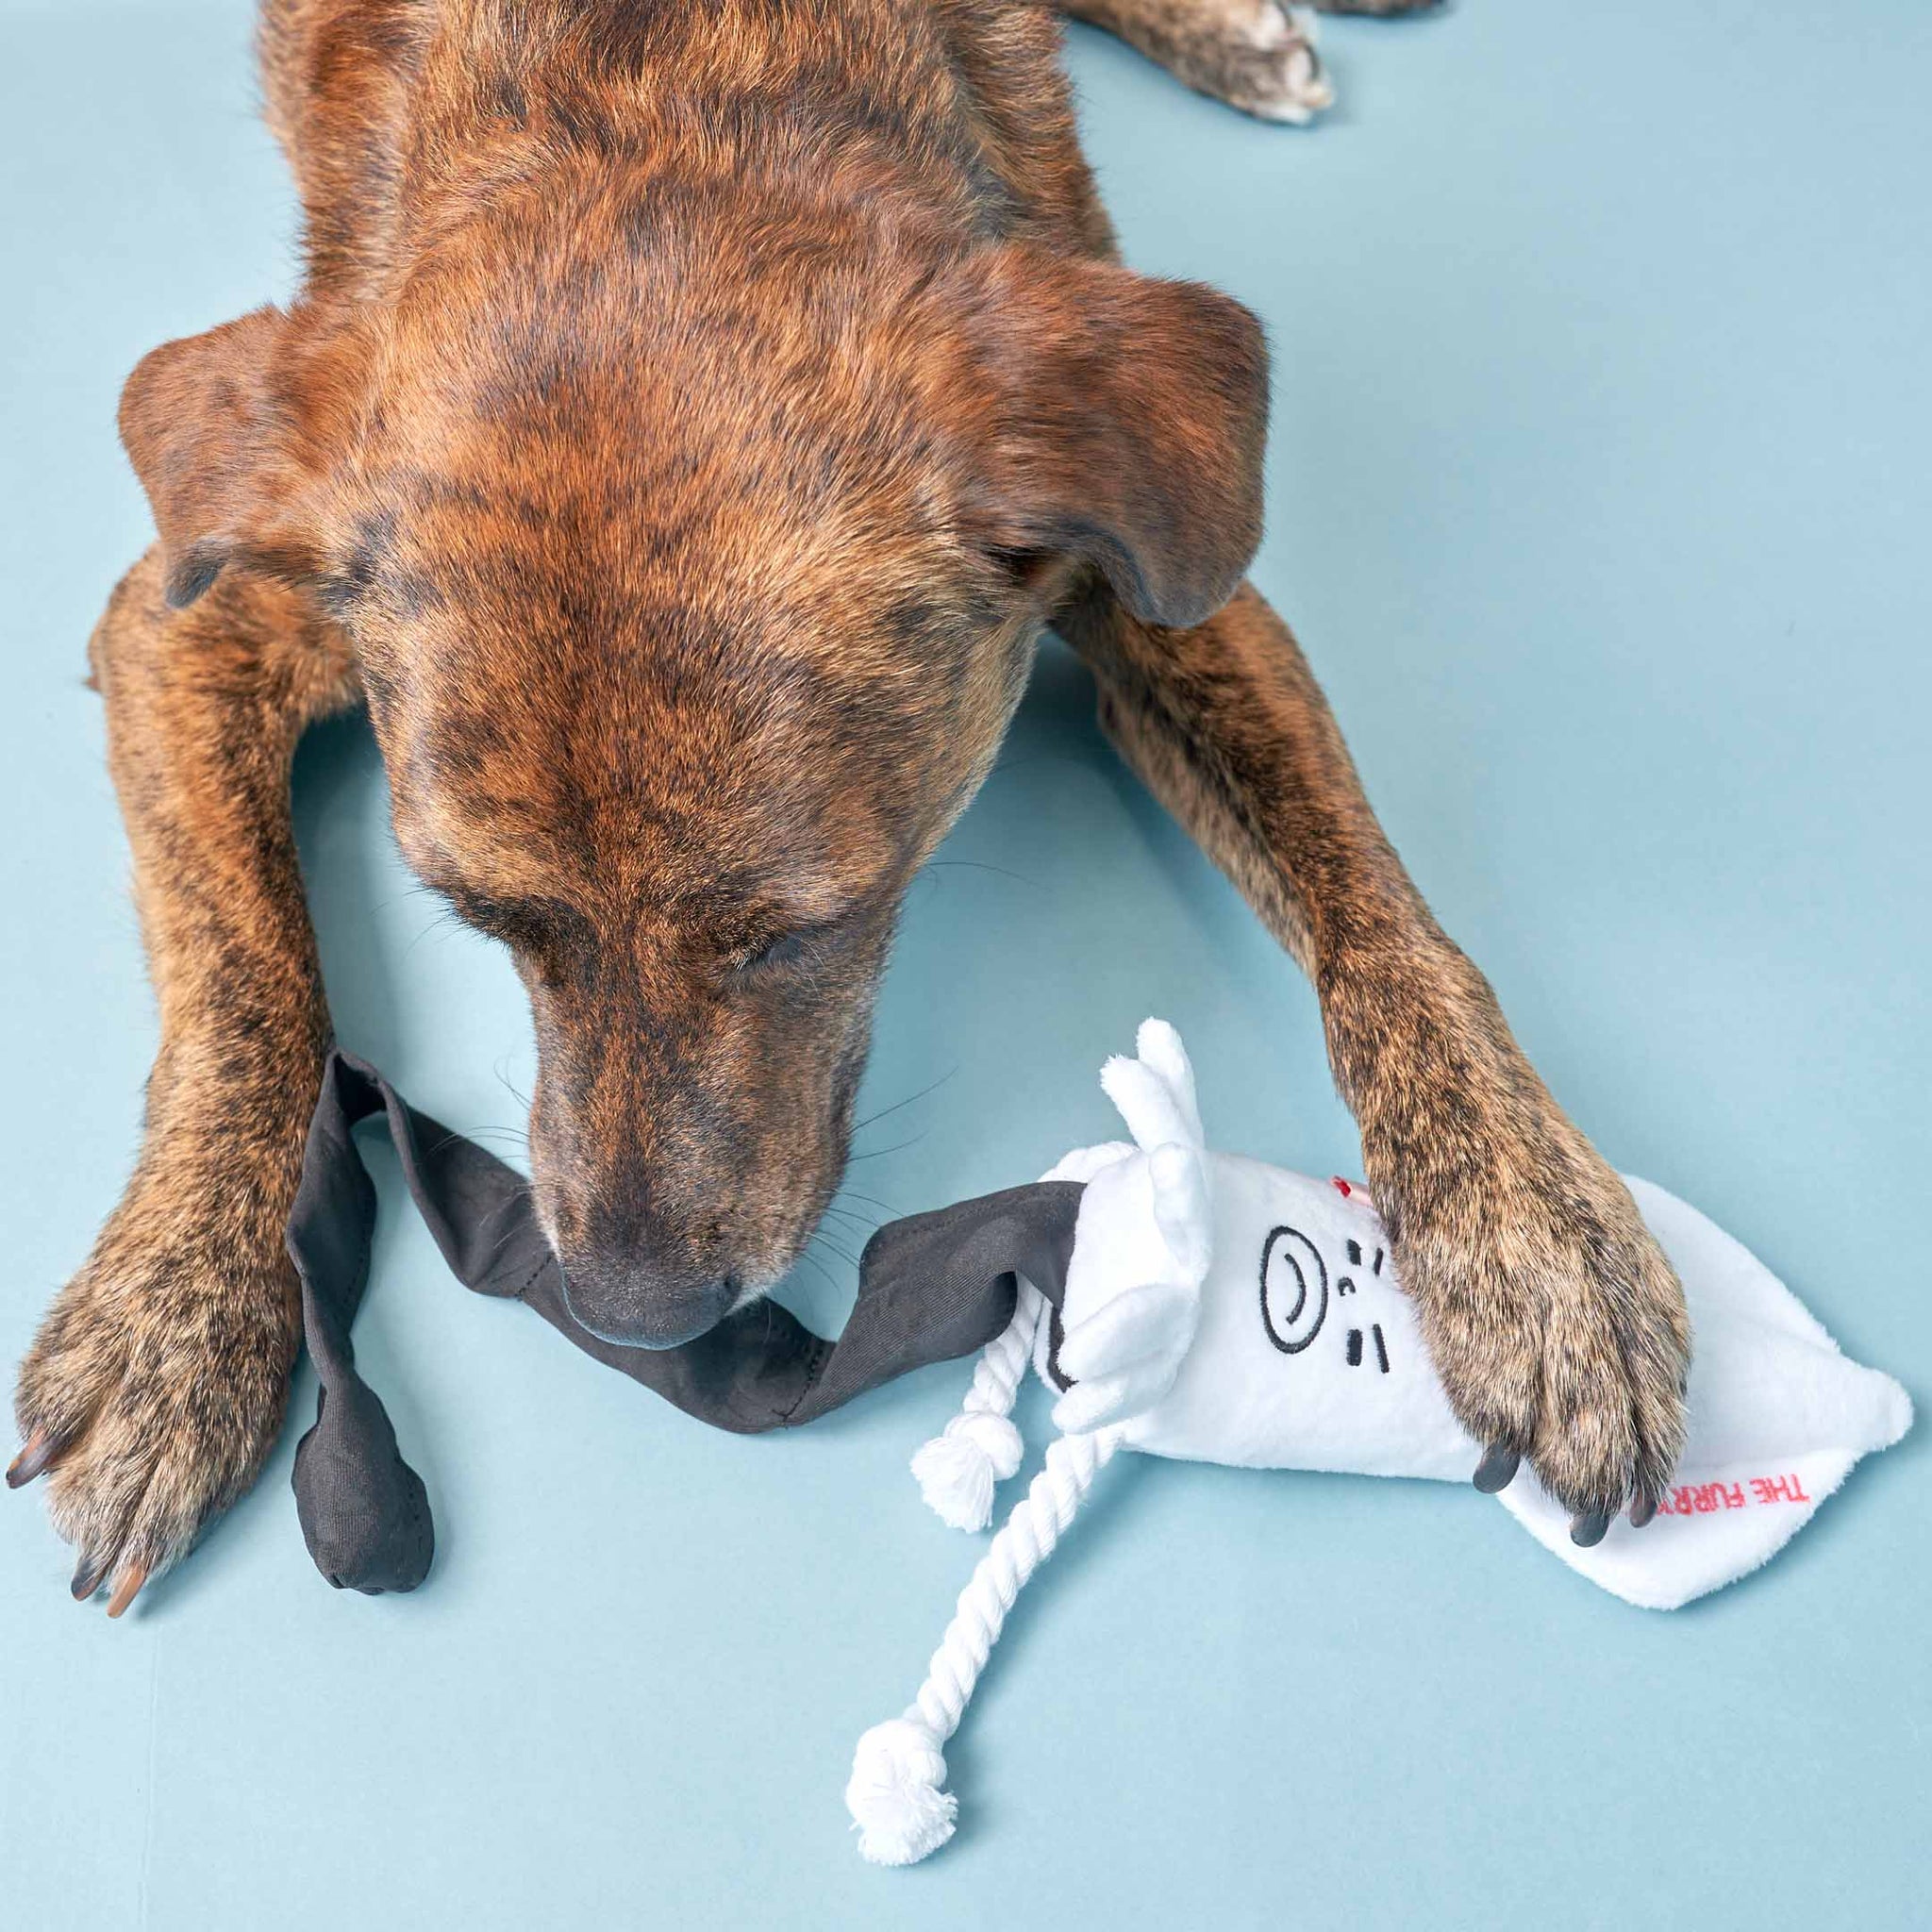 Uncle Calamari Dog Enrichment Toy: Elevate Playtime for Your Furry Friend with Thoughtful Design.